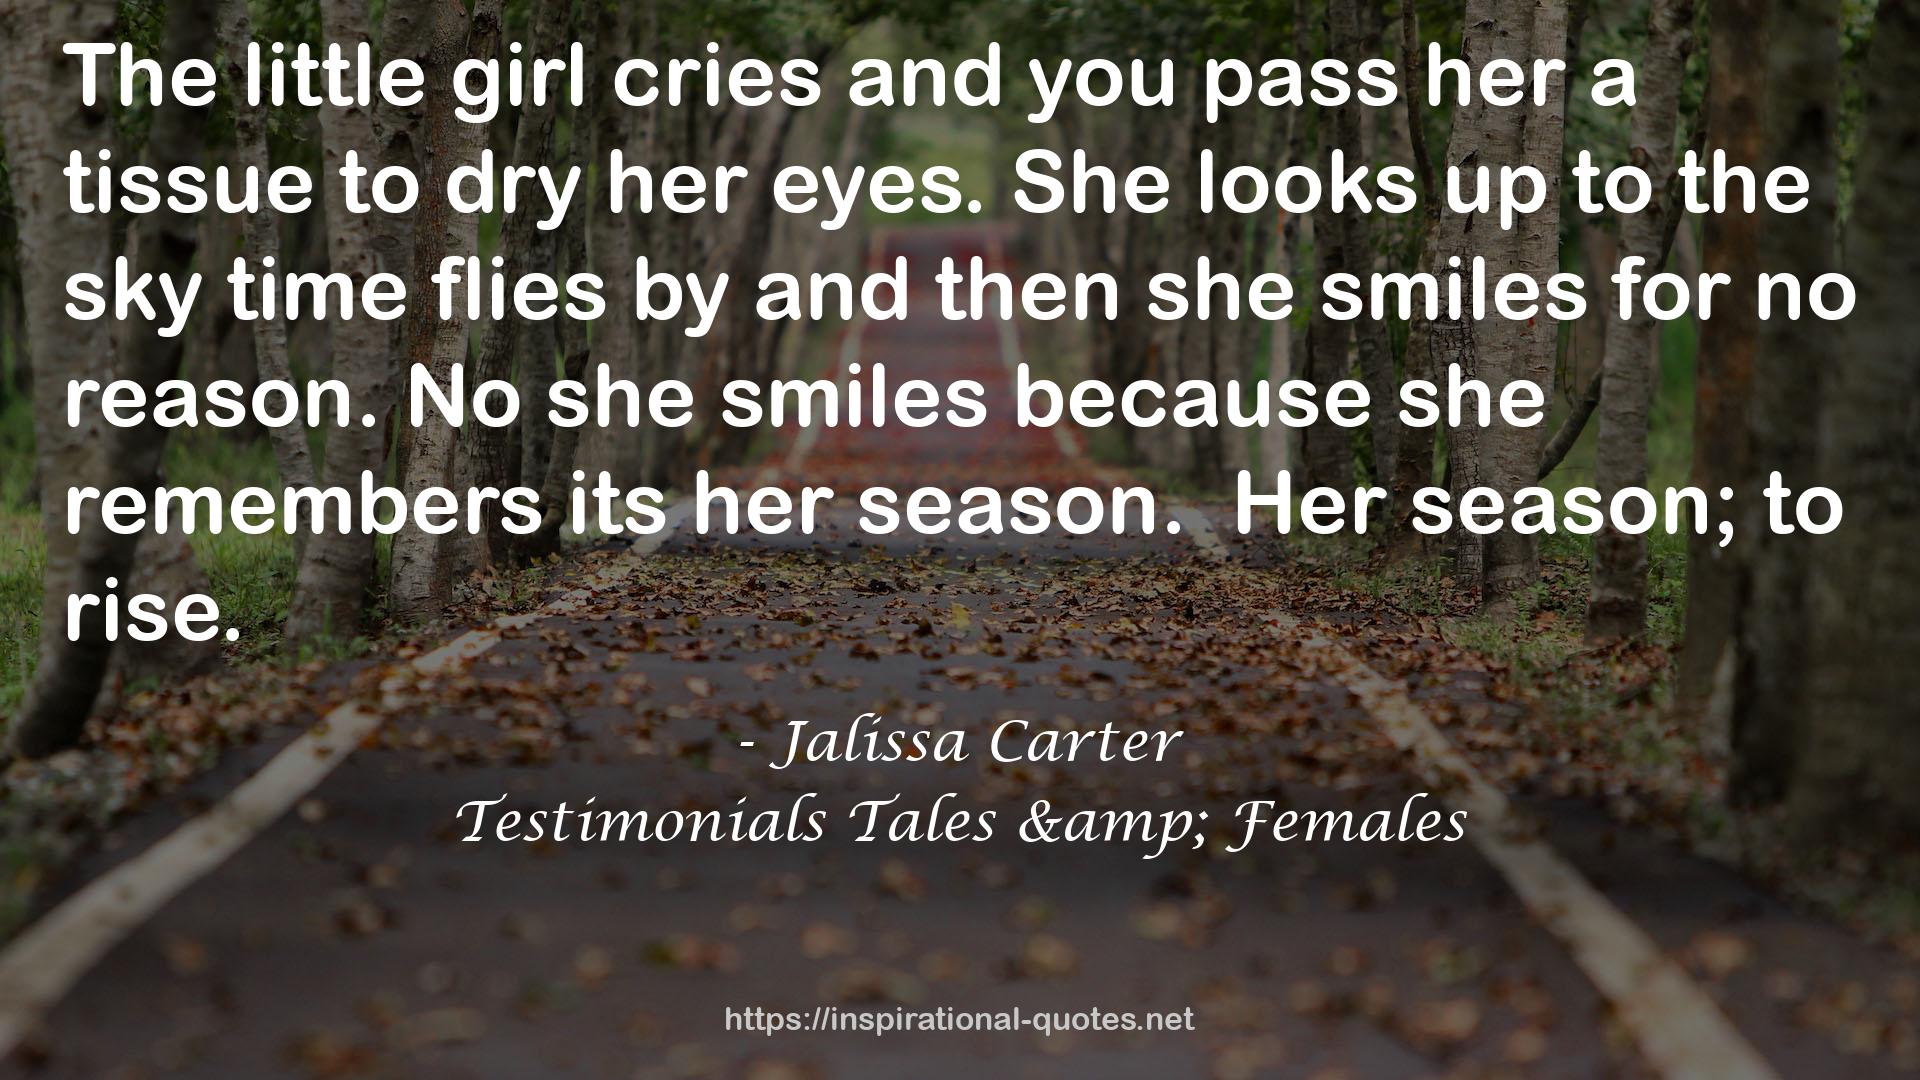 Jalissa Carter QUOTES